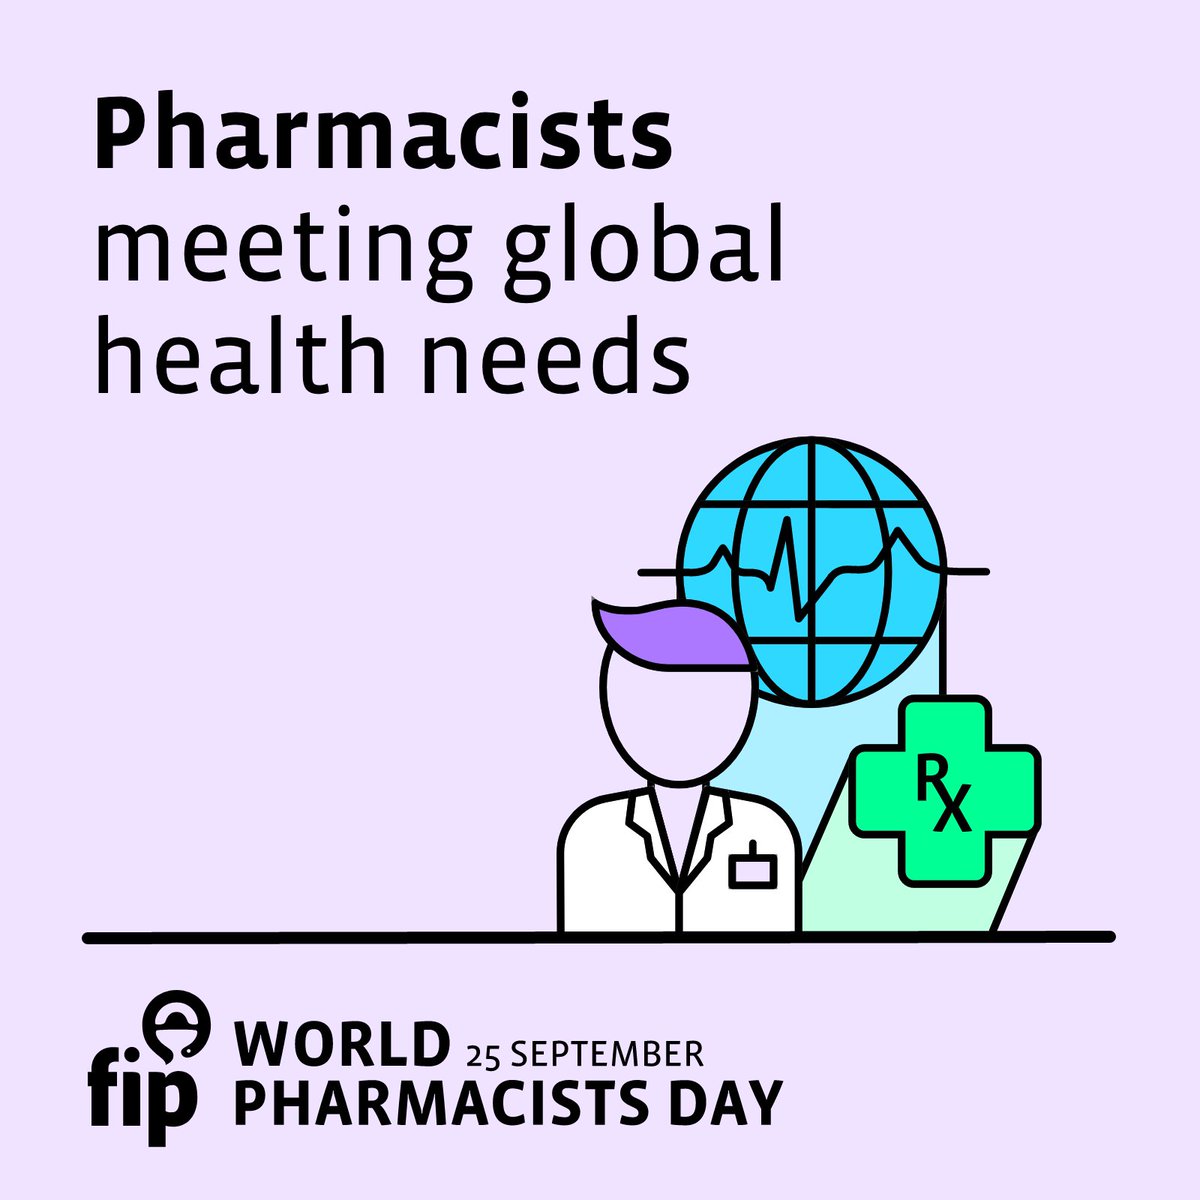 “Pharmacists: Meeting global health needs” is to be the theme of World Pharmacists Day on 25 September this year, FIP announced today. More information & campaign materials are available here 👉fip.org/world-pharmaci… #WorldPharmacistsDay.